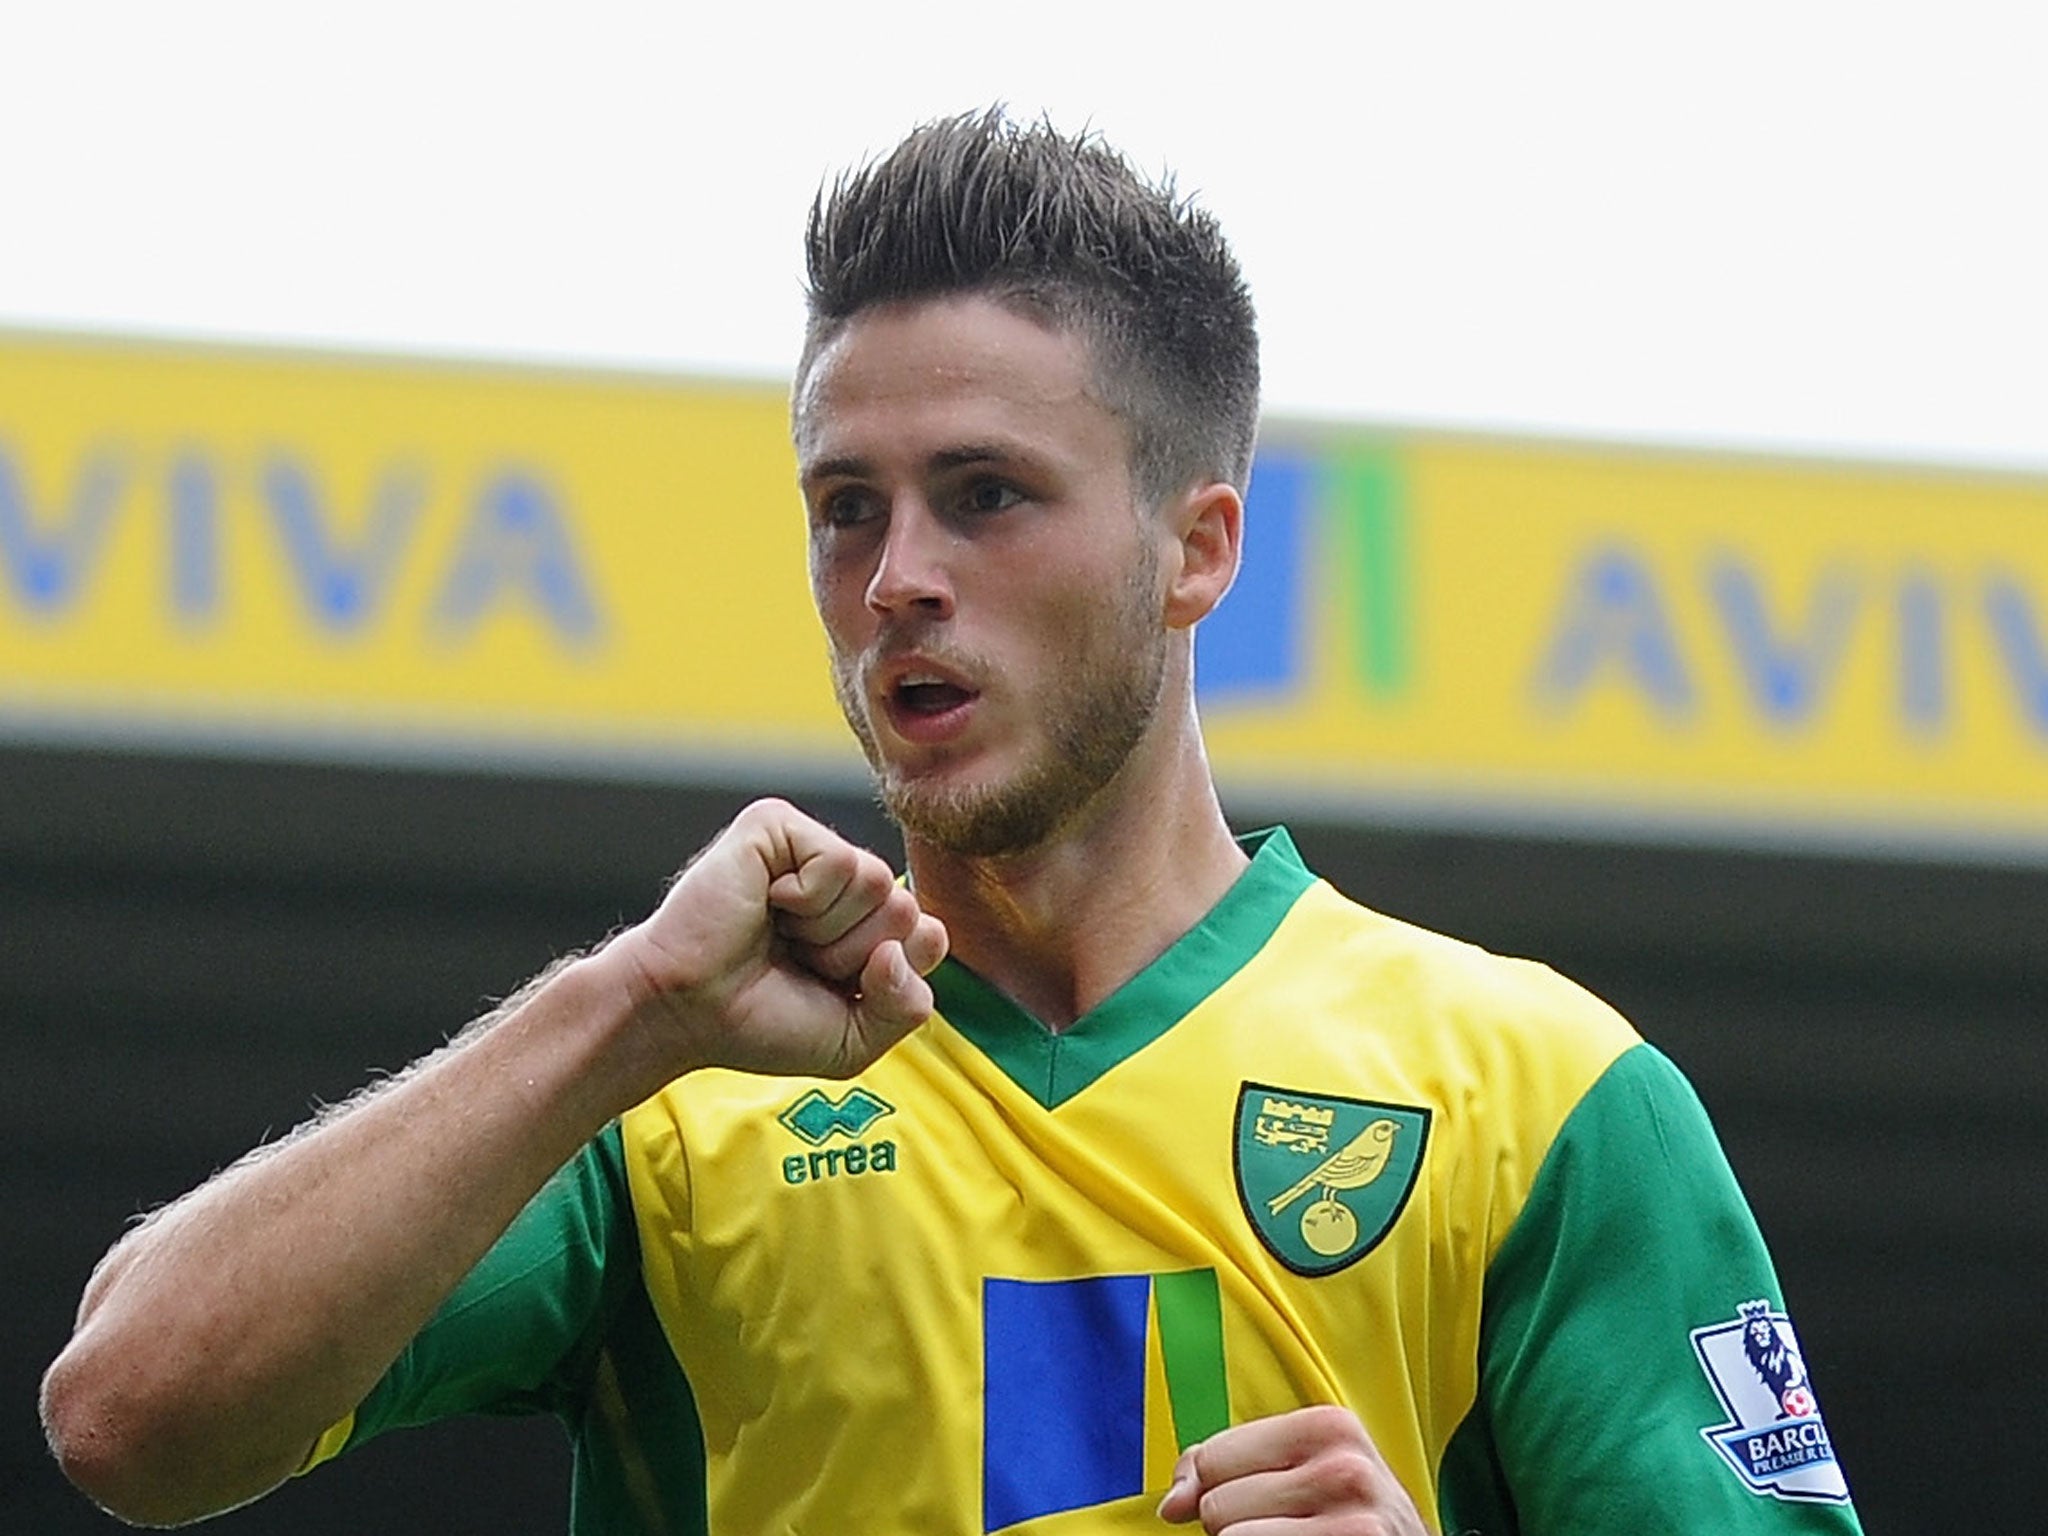 Ricky van Wolfswinkel marked his Norwich City debut with a goal last weekend